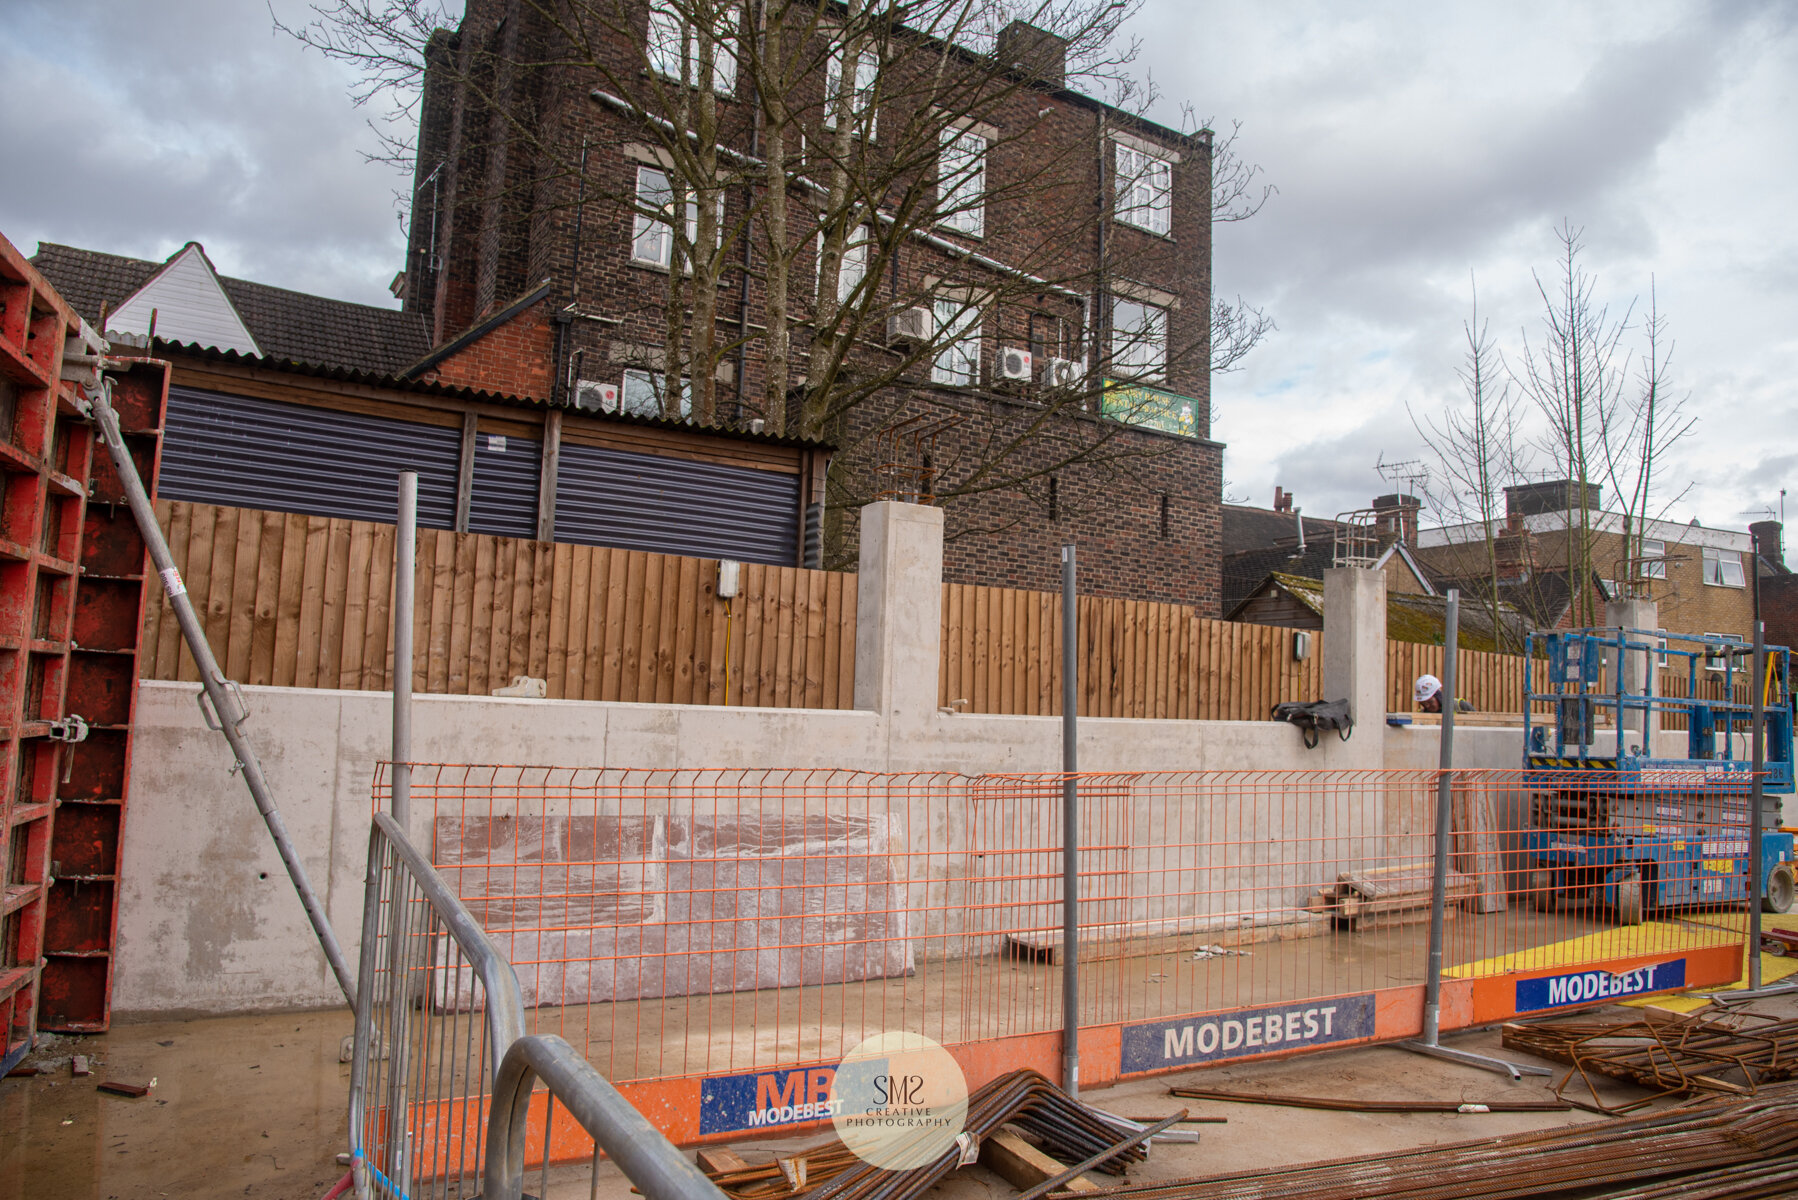  Behind the shops in Station Road East, the carparks are taking shape. 